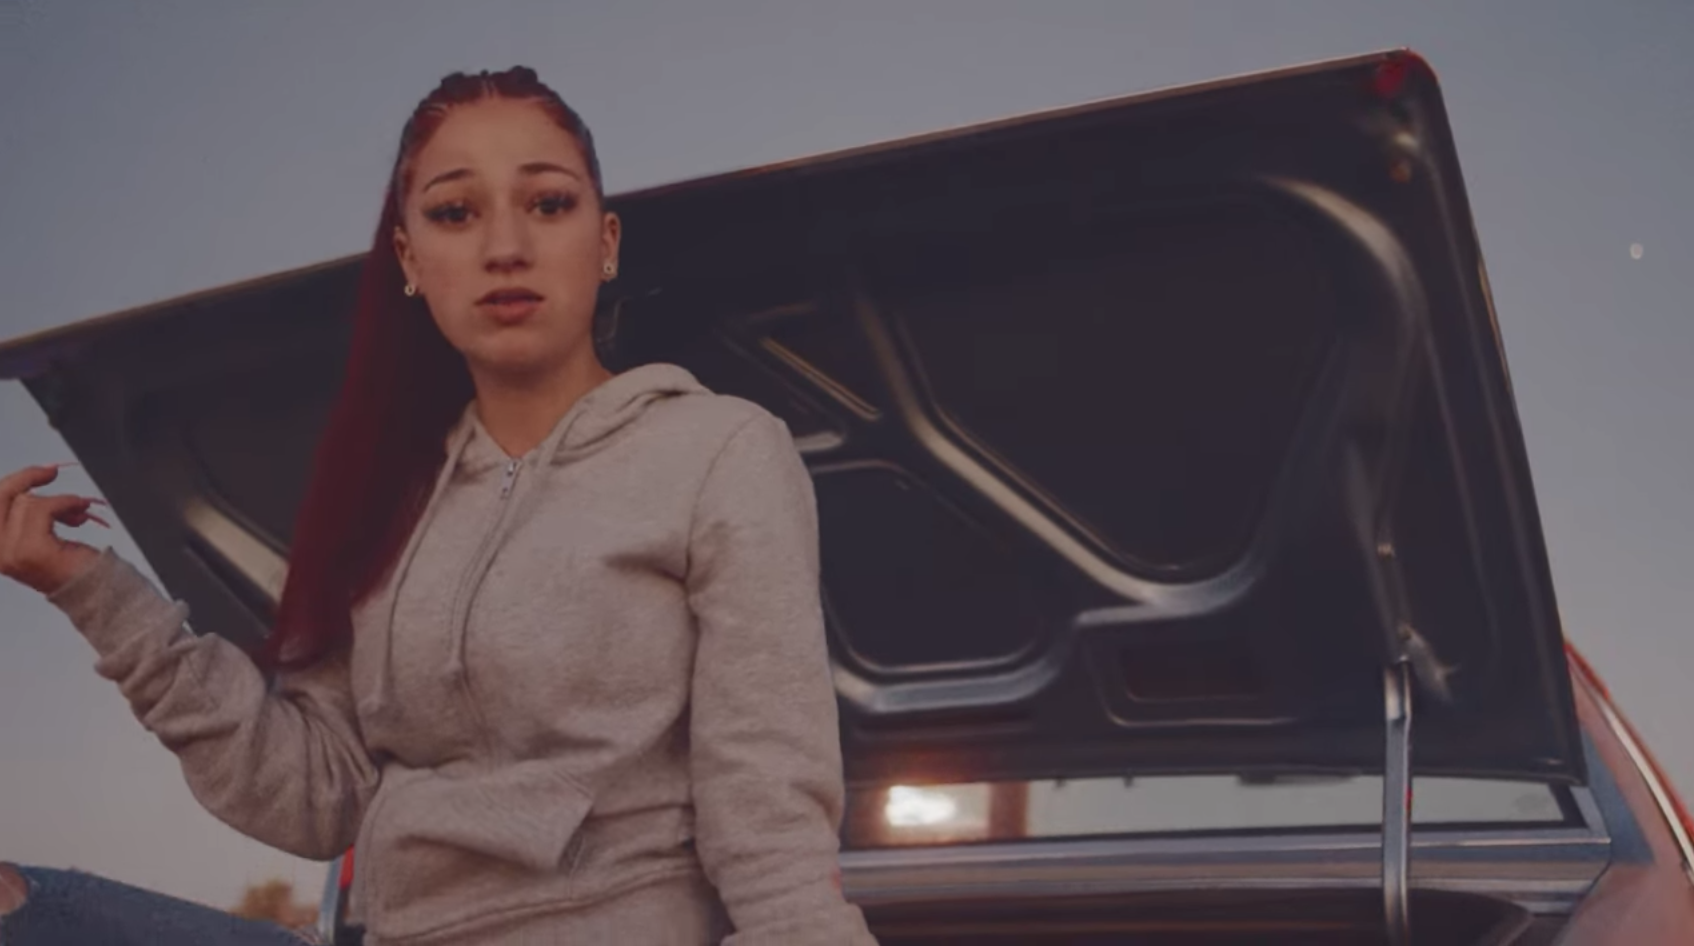 Bhad Bhabie Wants You To Know She Knows Rihanna And Ariana Grande On New Song 'Both Of Em'